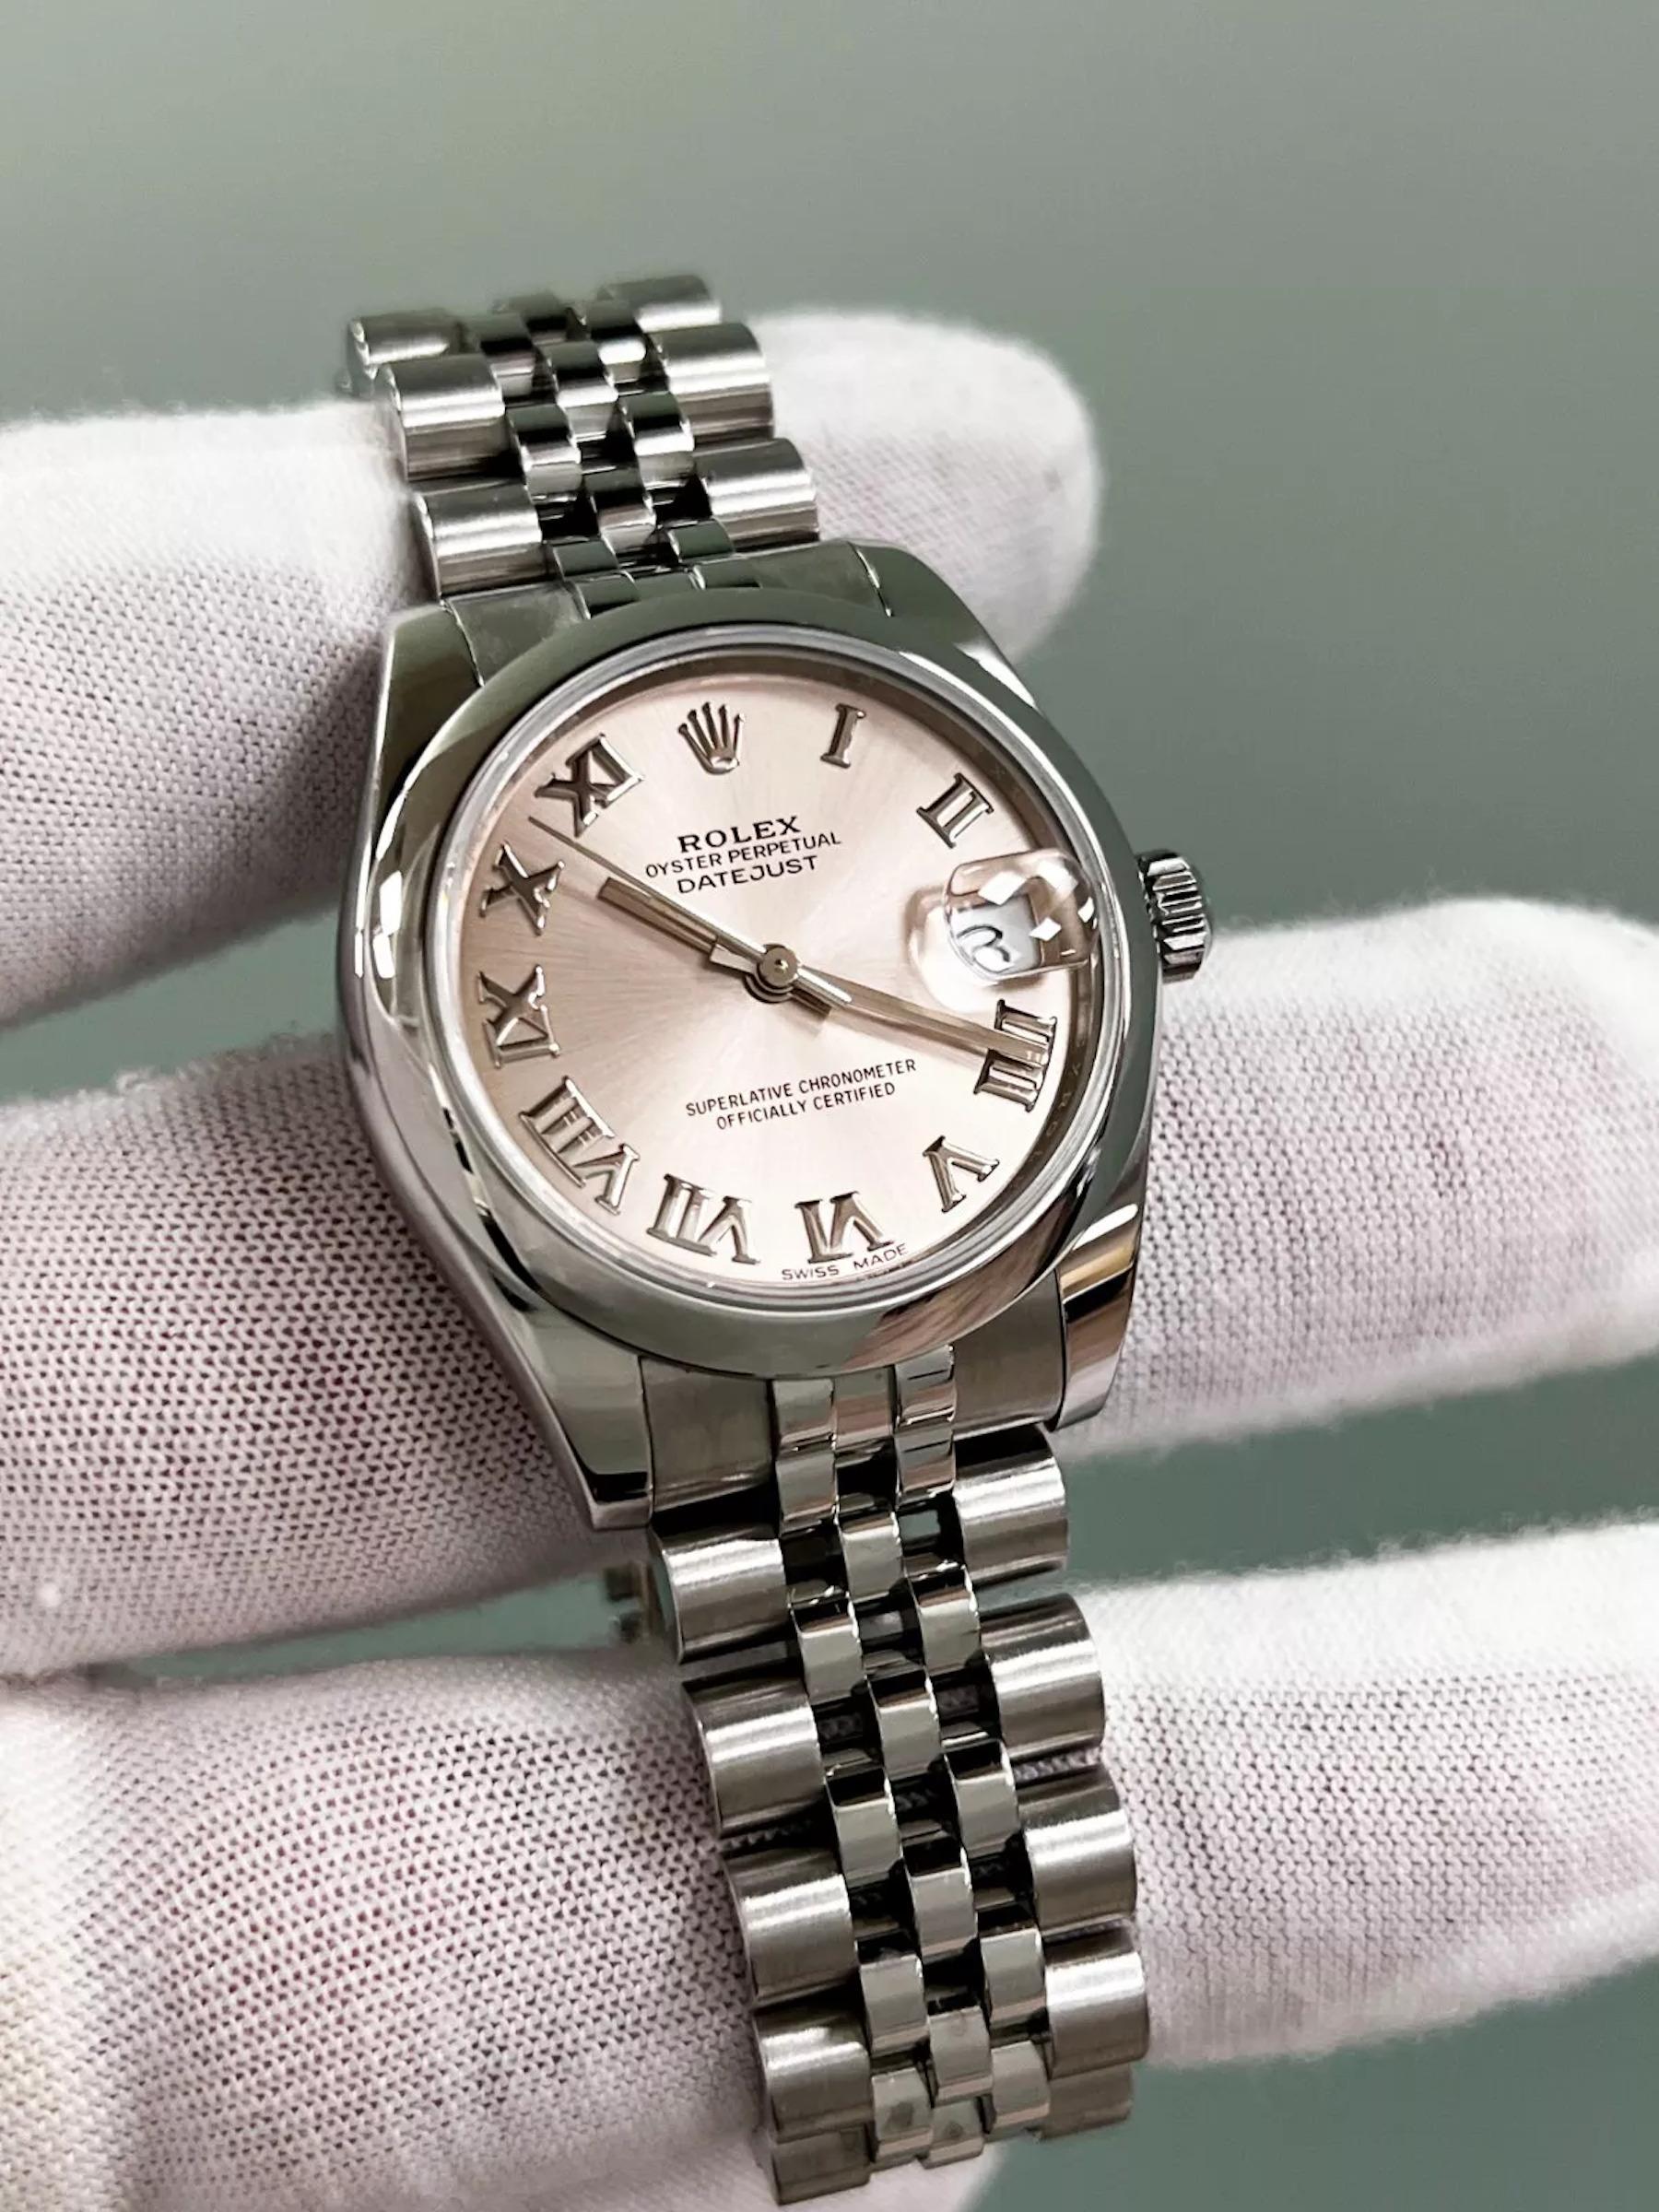 Style Number: 178240

Serial: 71P26***

Year: 2020

Model: Datejust 

Case Material: Stainless Steel 

Band: Stainless Steel 

Bezel: Stainless Steel 

Dial: Pink Roman Dial 

Face: Sapphire Crystal 

Case Size: 31mm 

Includes: 

-Rolex Box &